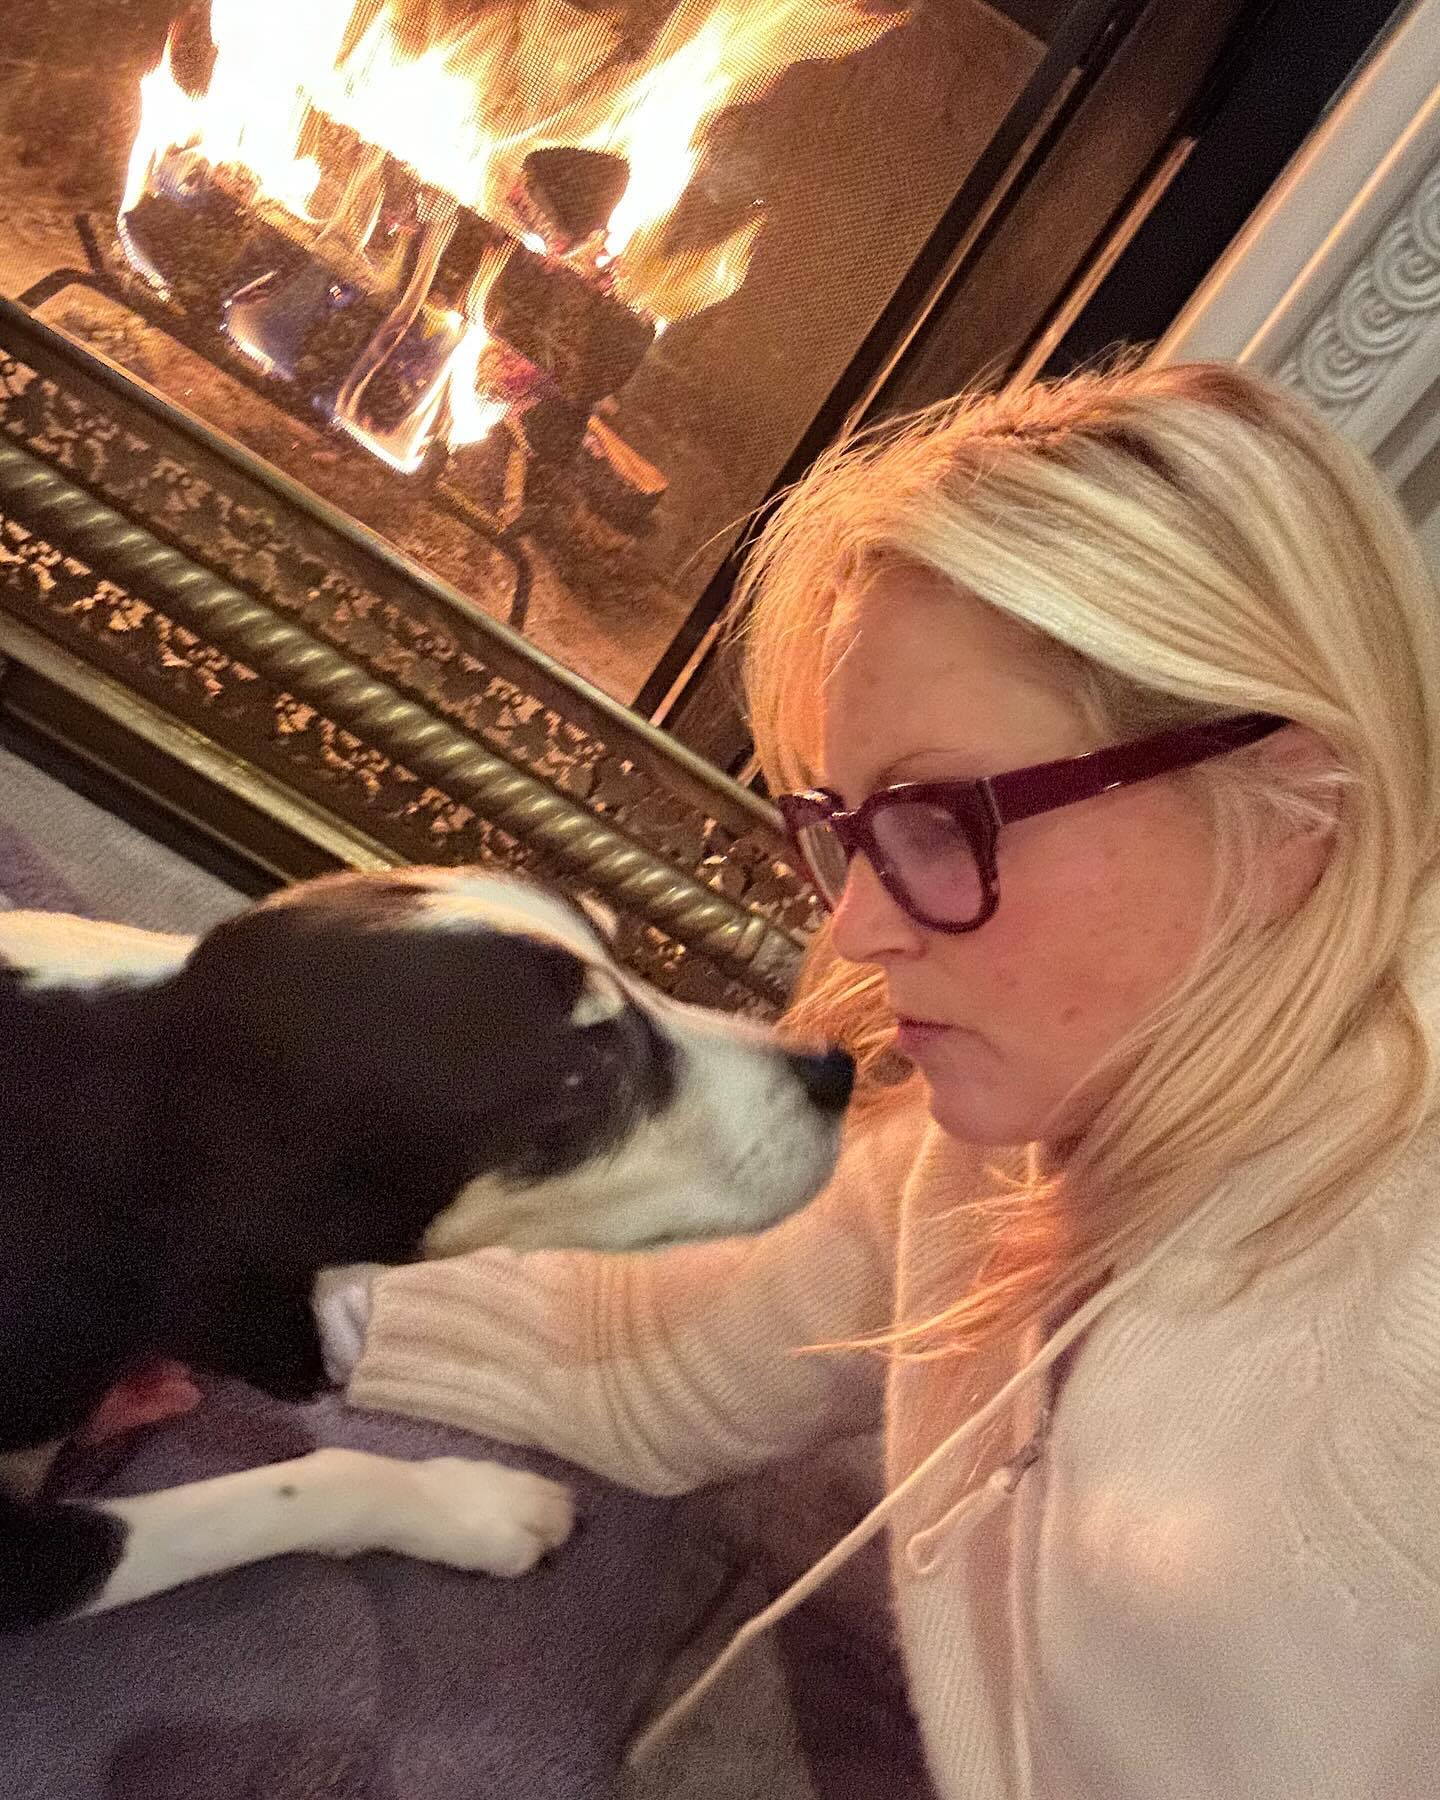 Ali cozied up to their dog against a roaring fire